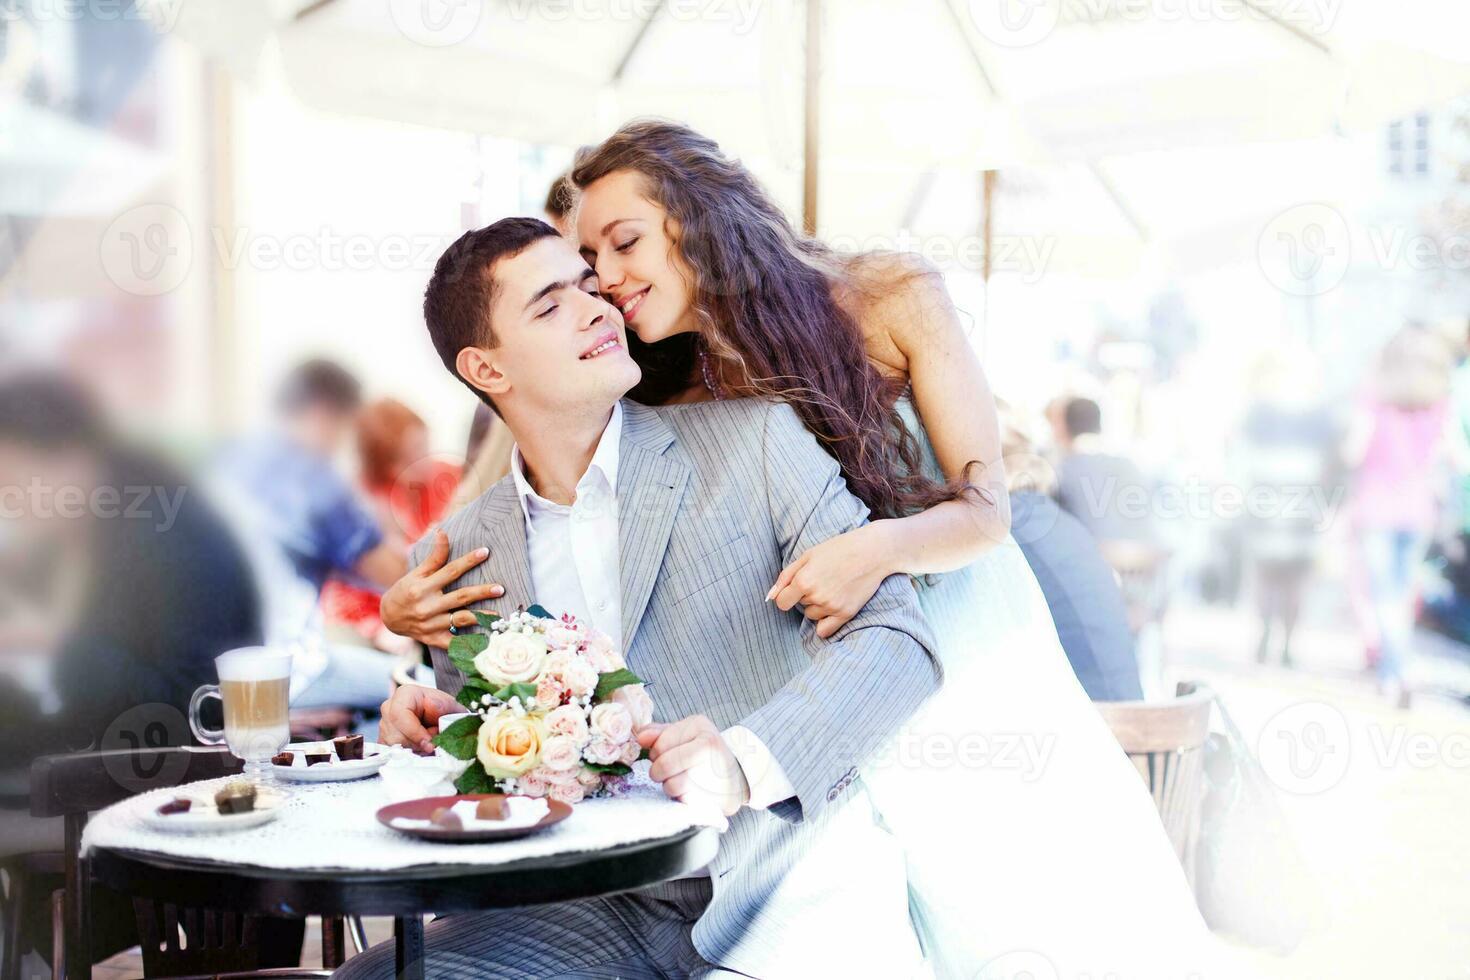 couple in restaurant outdoors on a street photo